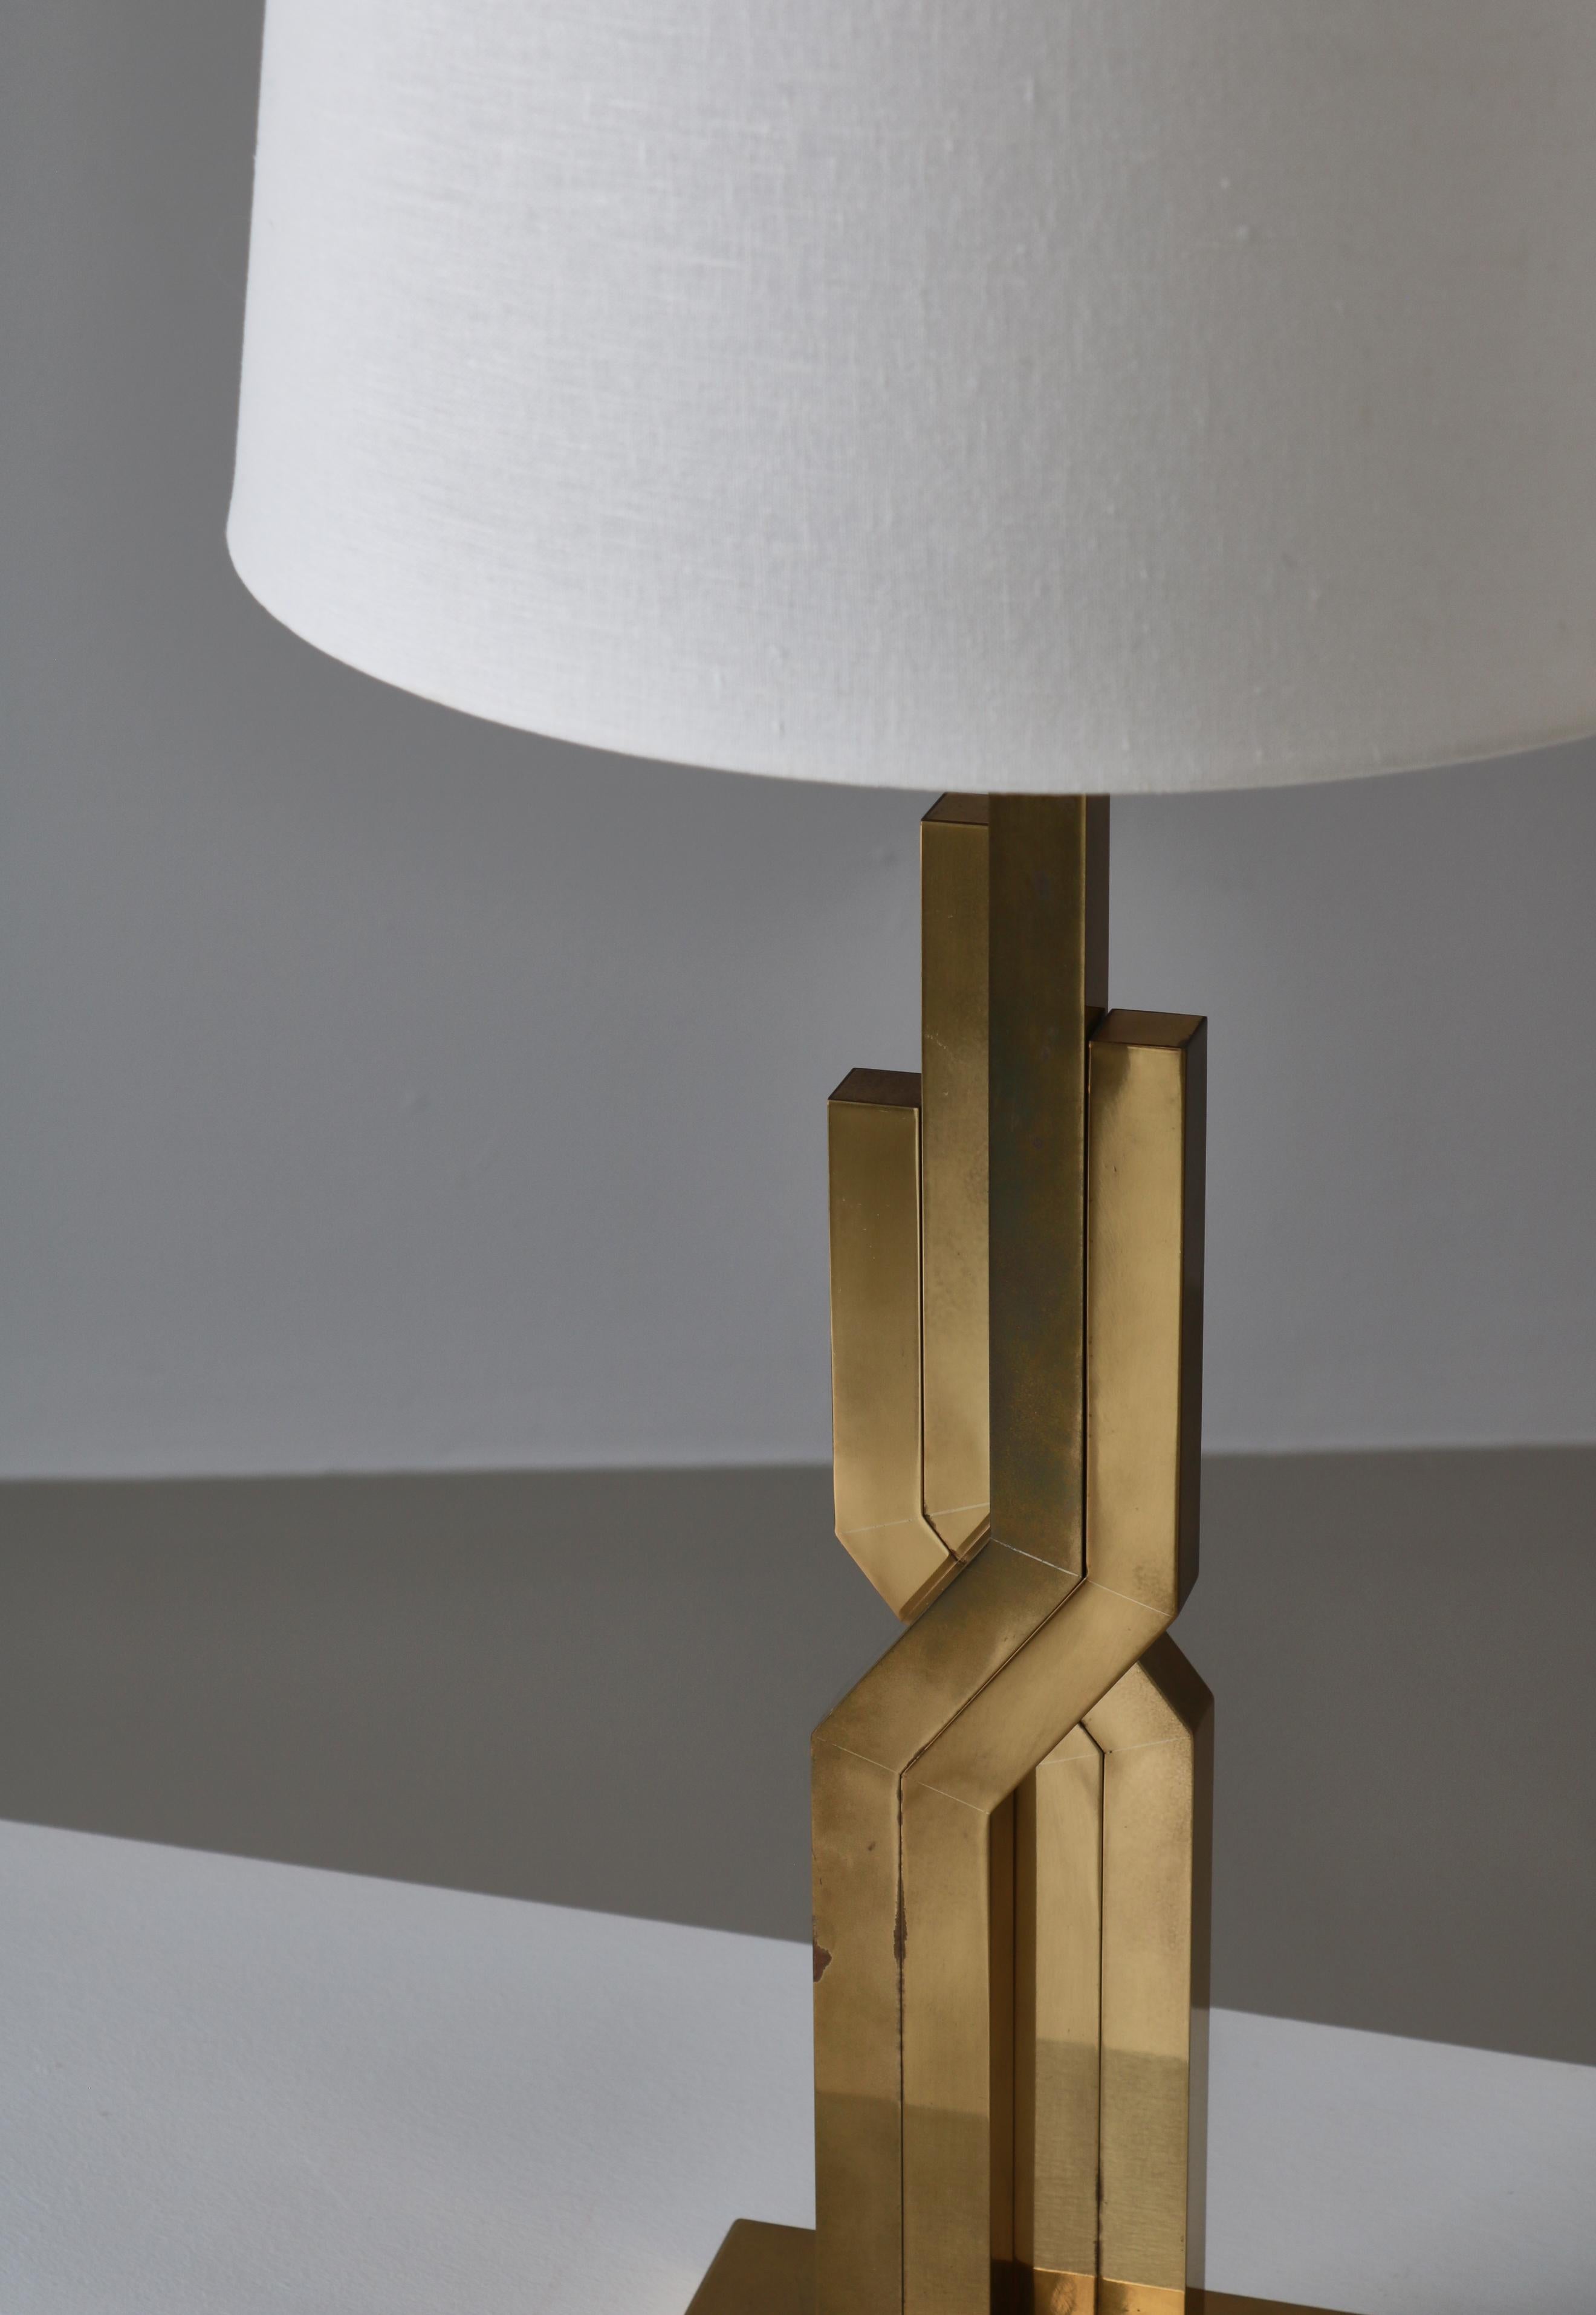 Large Danish Modern Table Lamps in Brass by Svend Aage Holm-Sørensen, 1960s In Good Condition For Sale In Odense, DK